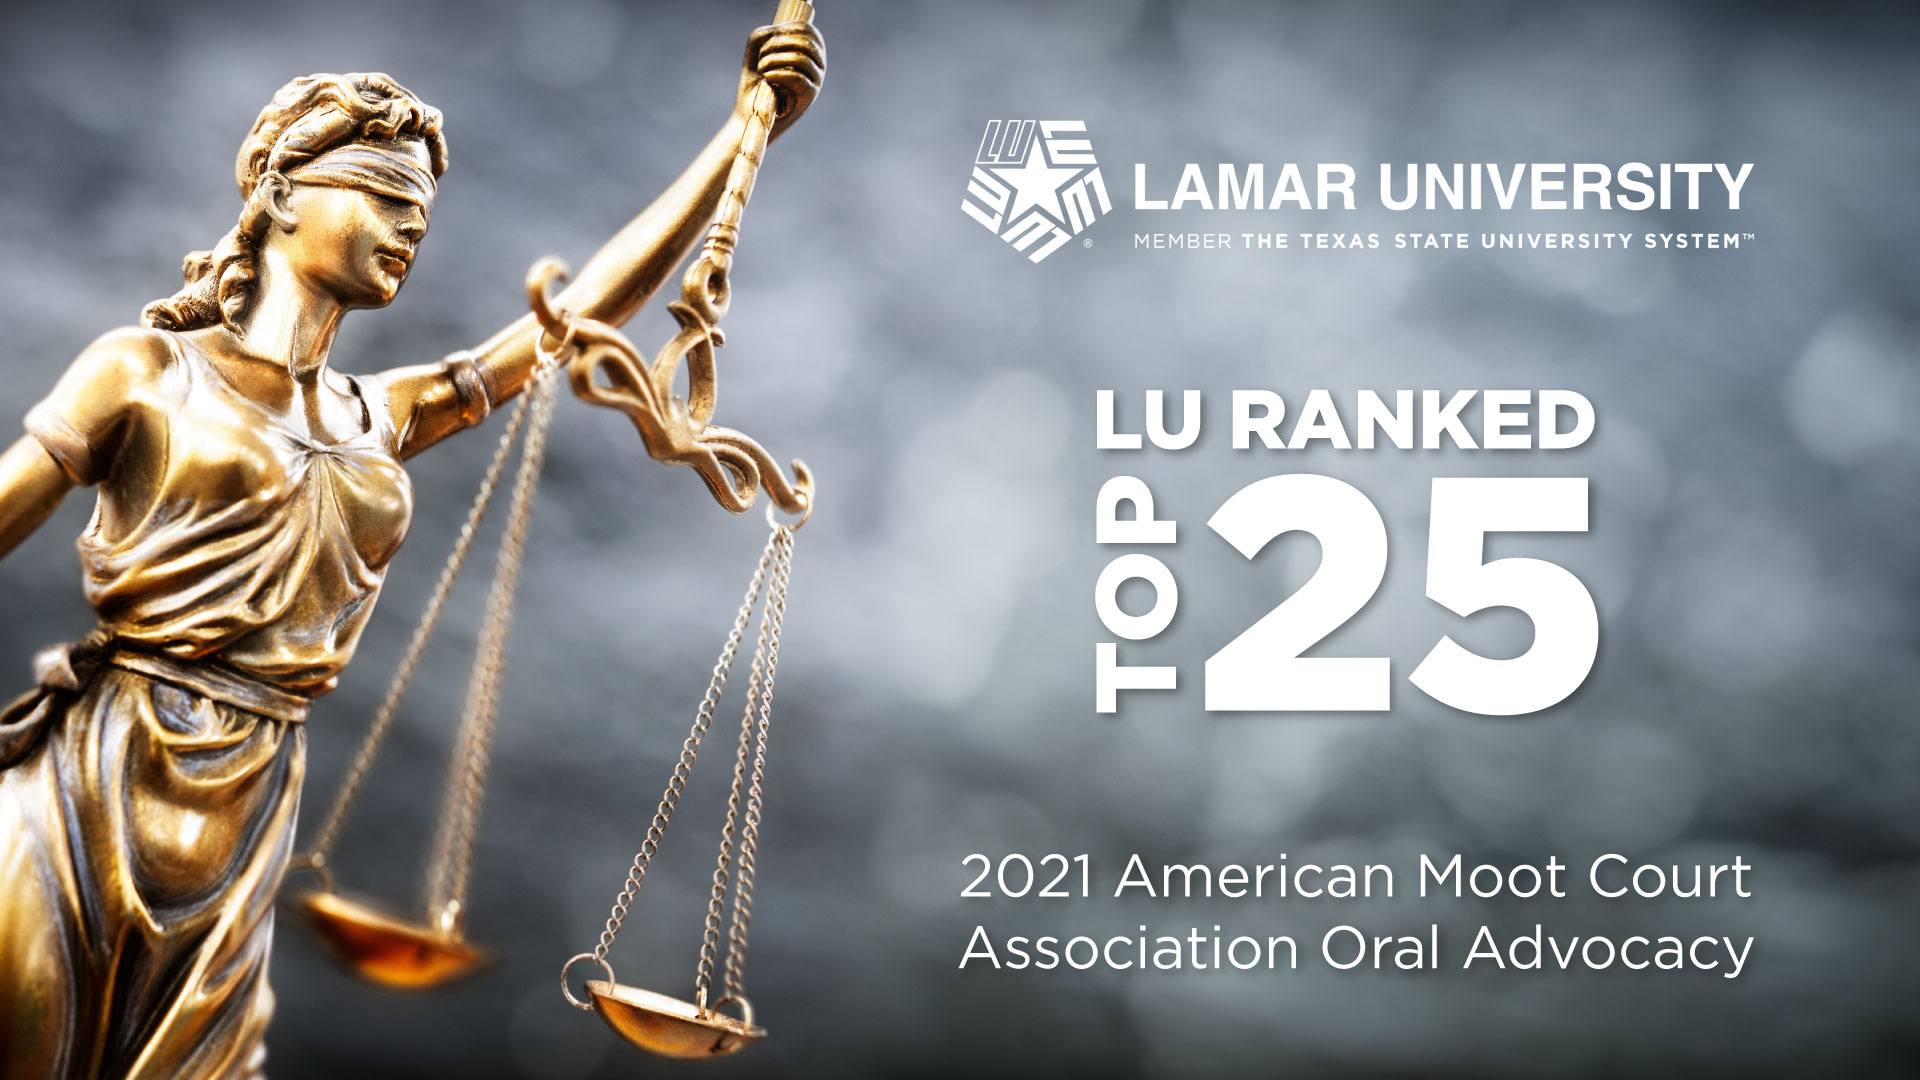 LU Ranks in top 25 in the American Moot Court Association Oral Advocacy for 2021